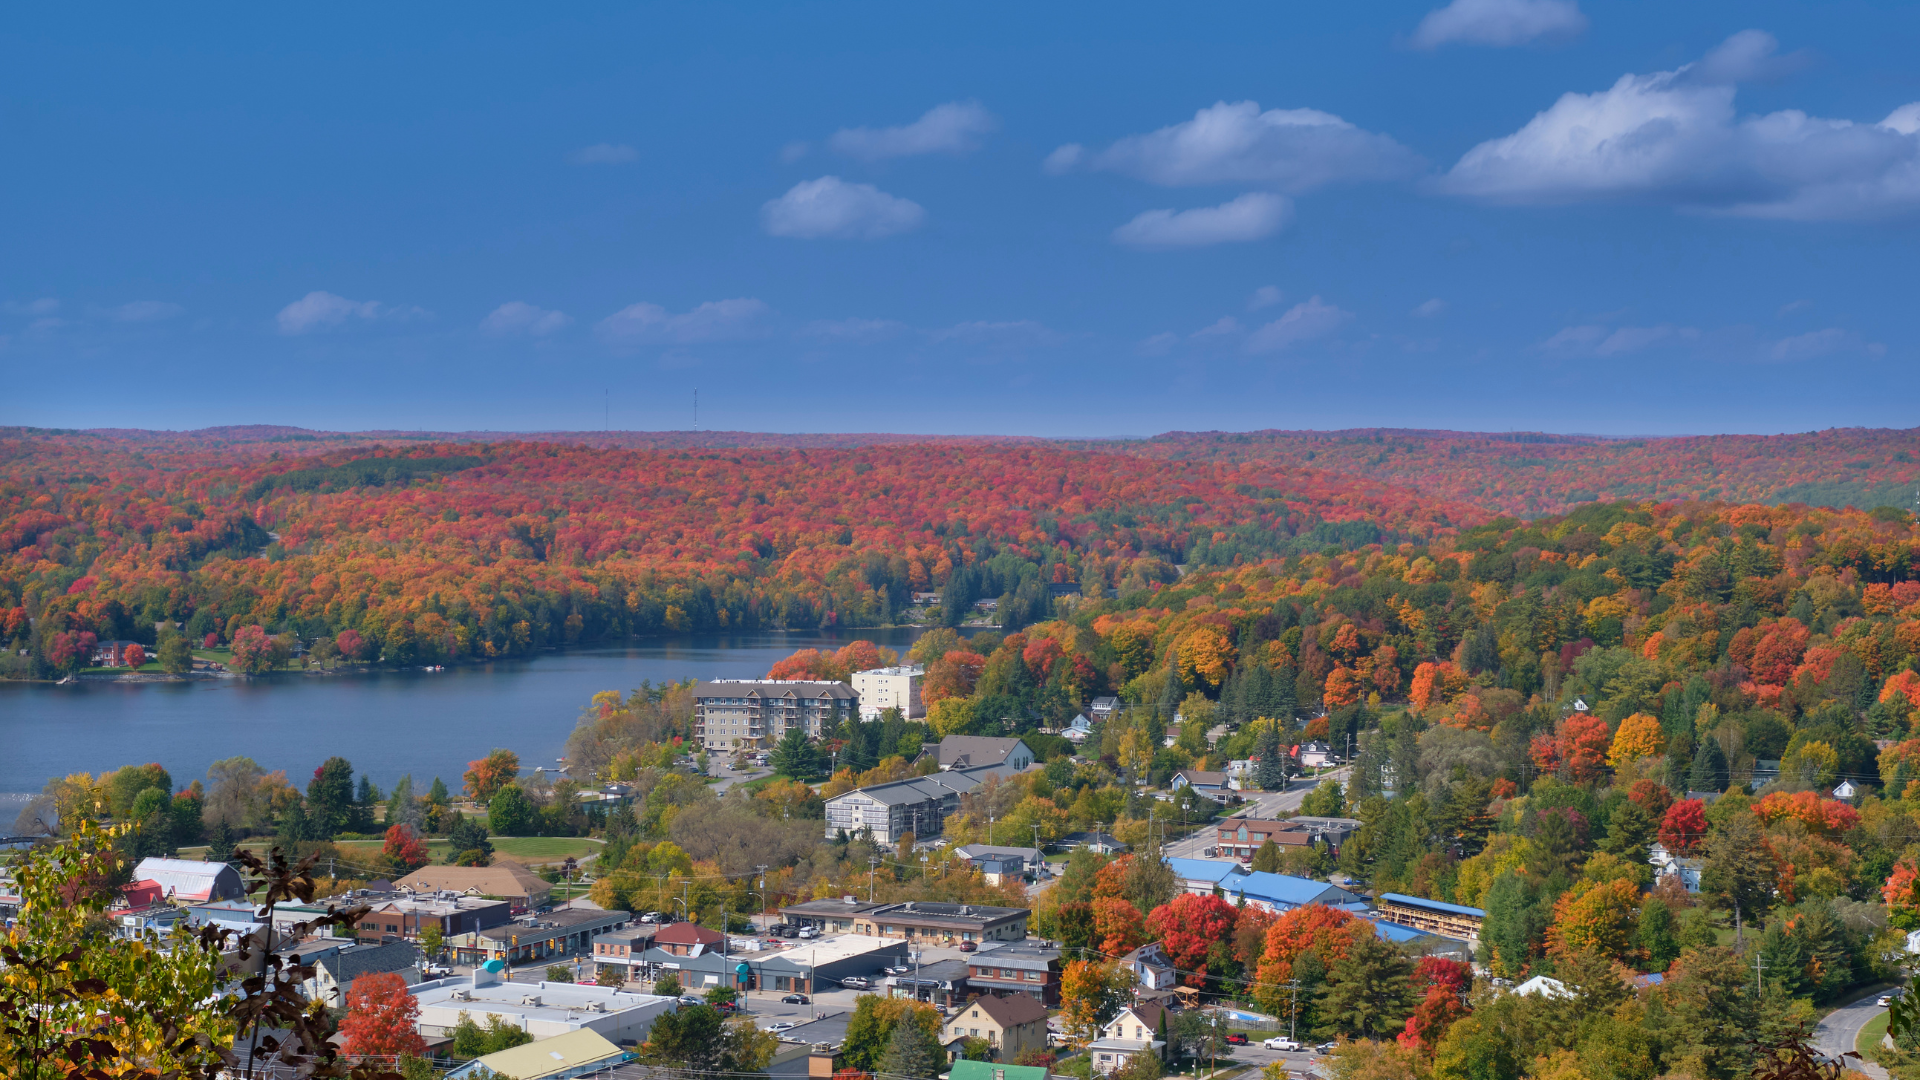 Geography and scenery of Haliburton County